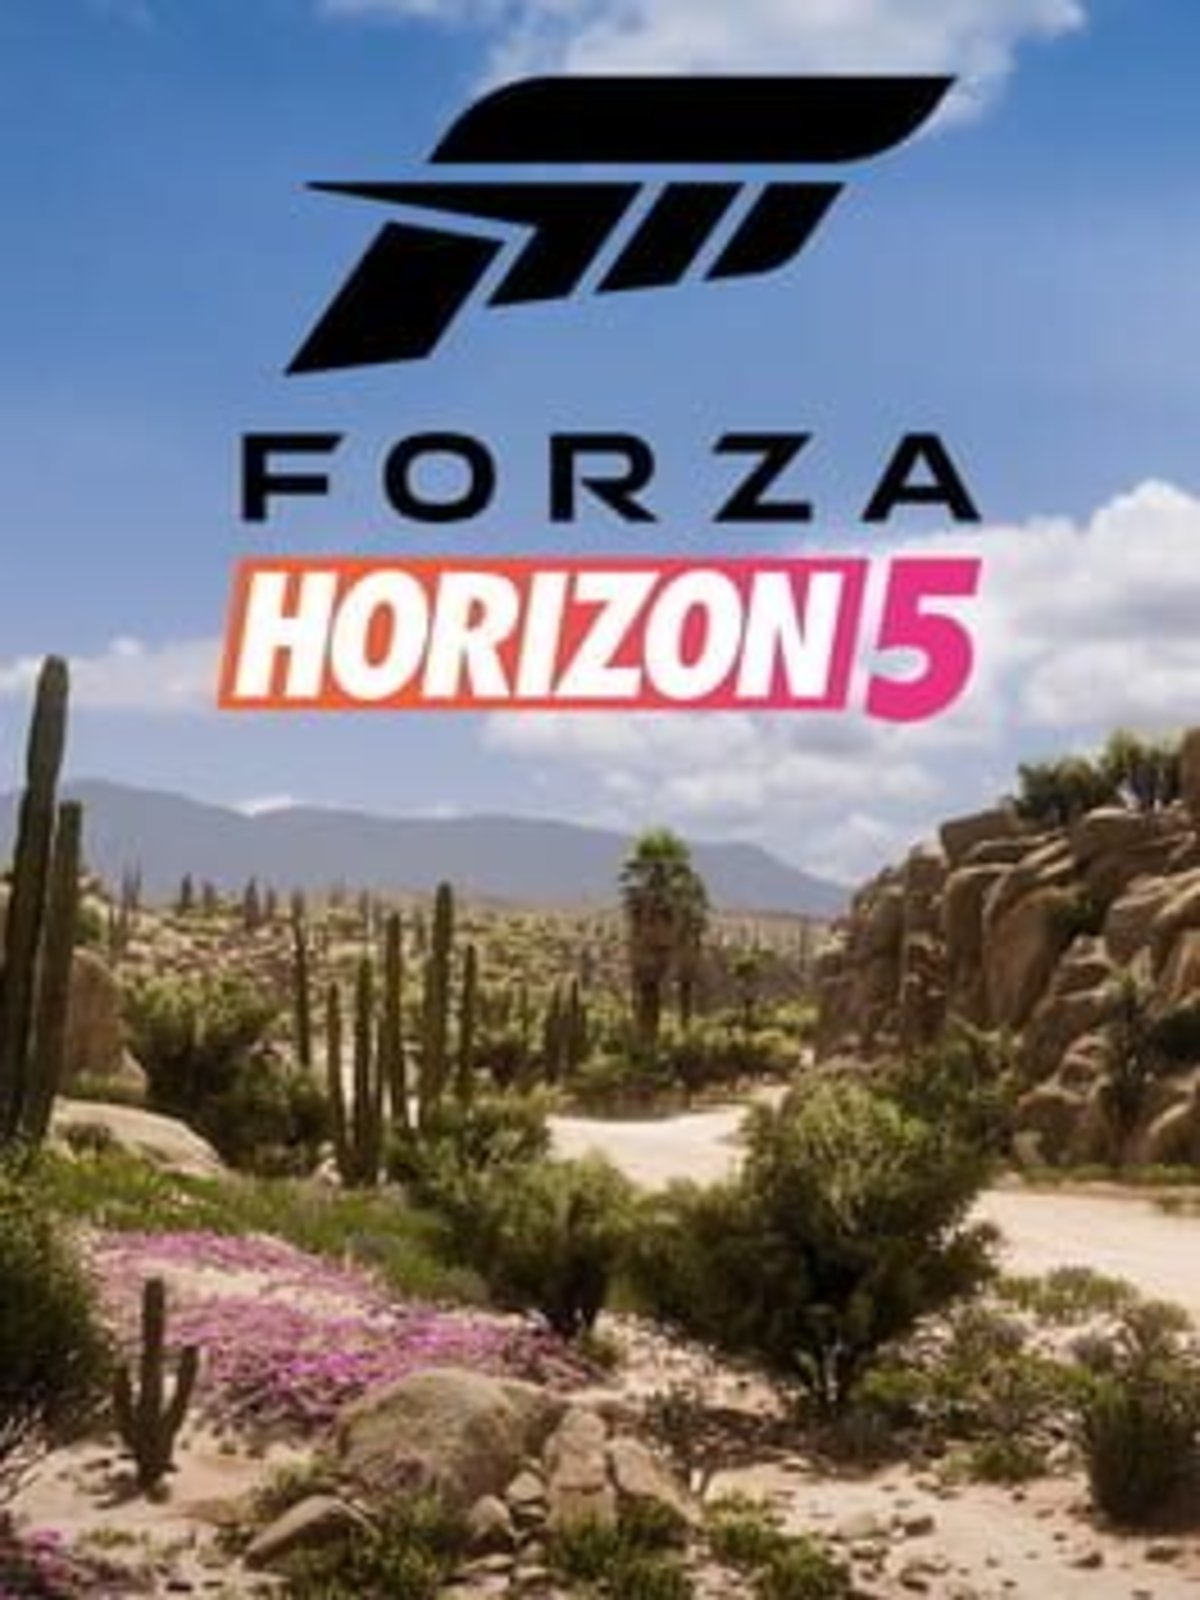 Forza Horizon 5 offers new details of its development